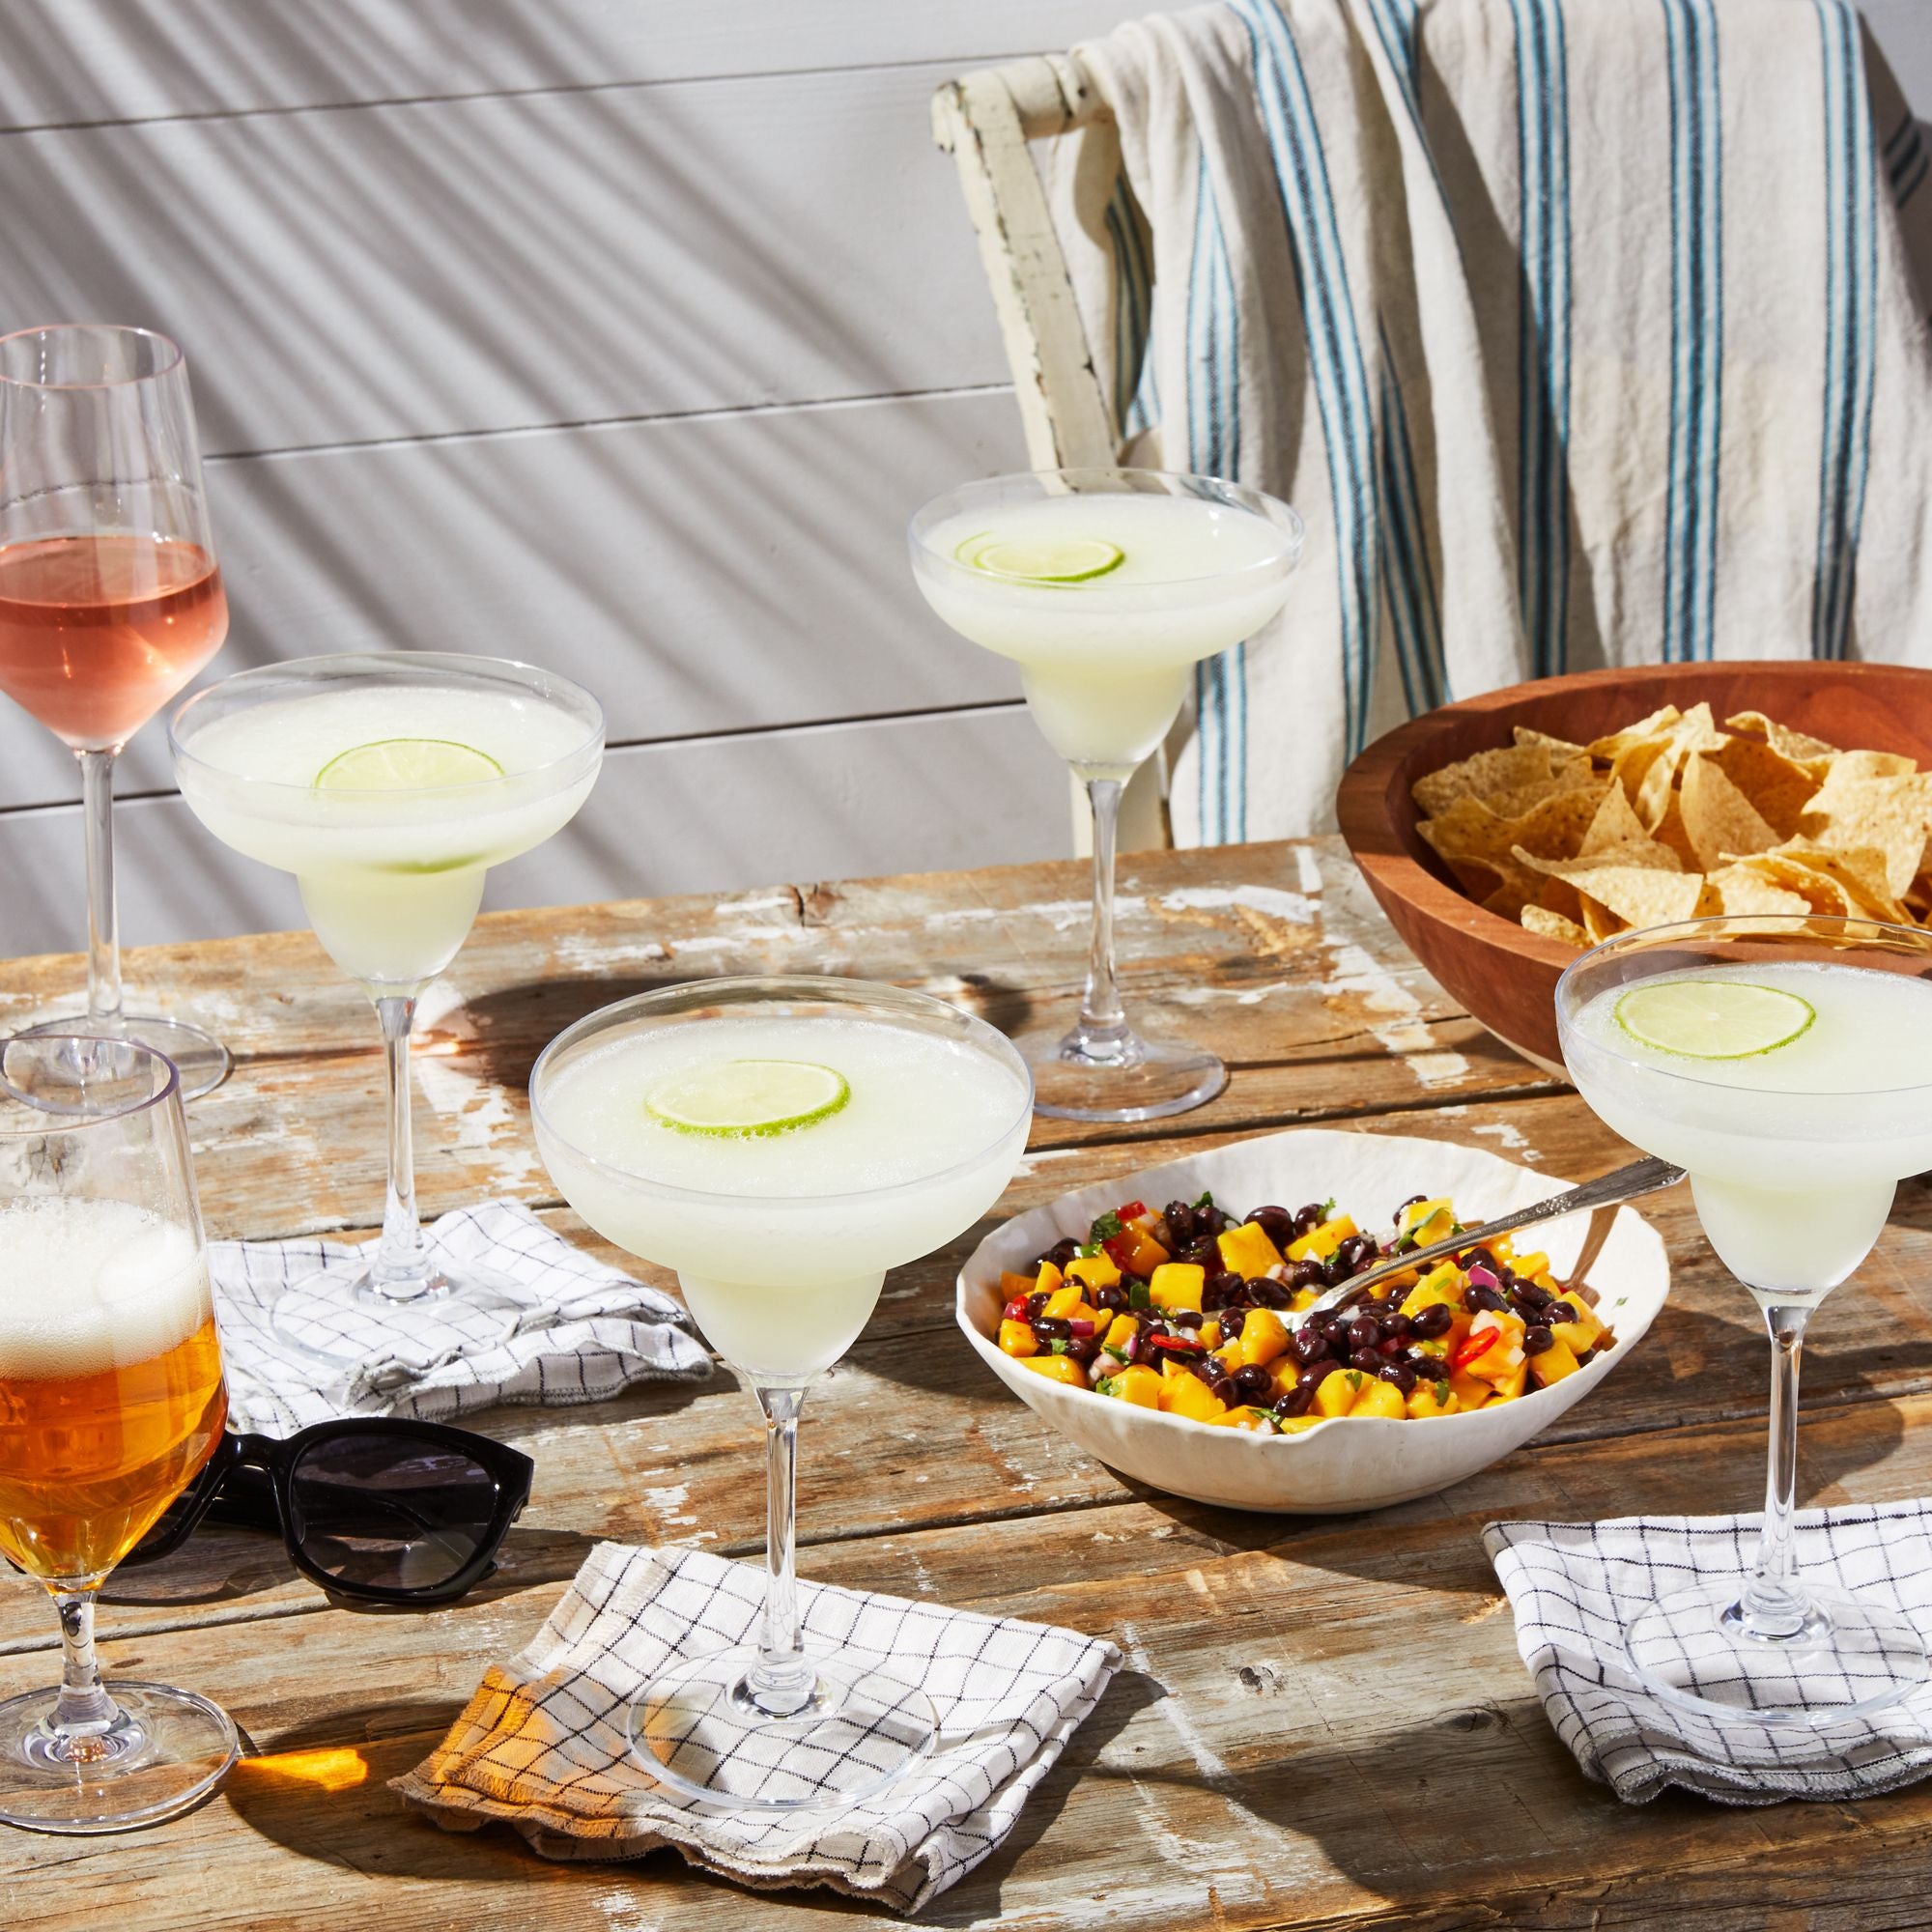 Plastic Wine Glasses: 11 Of The Best For Risk Free Drinks Outdoors